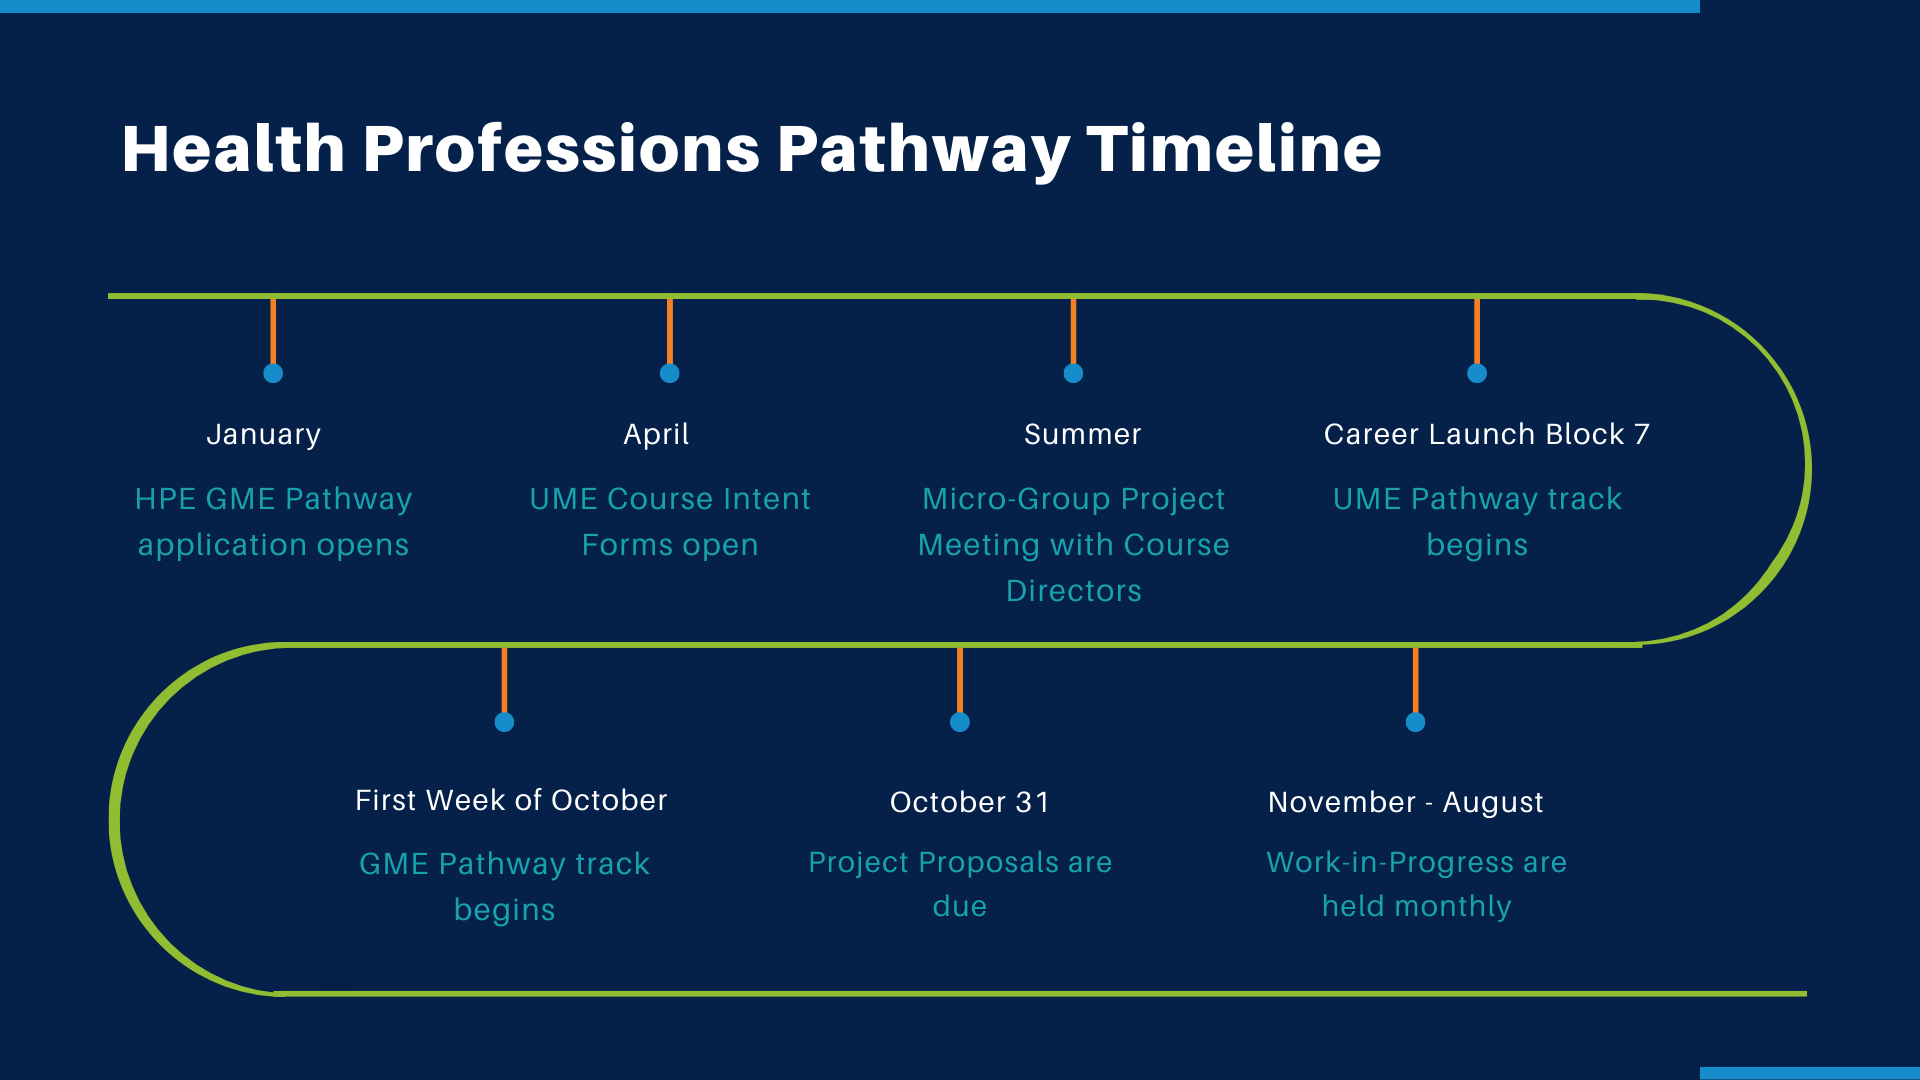 HPE Pathway timeline with list of important dates and requirements